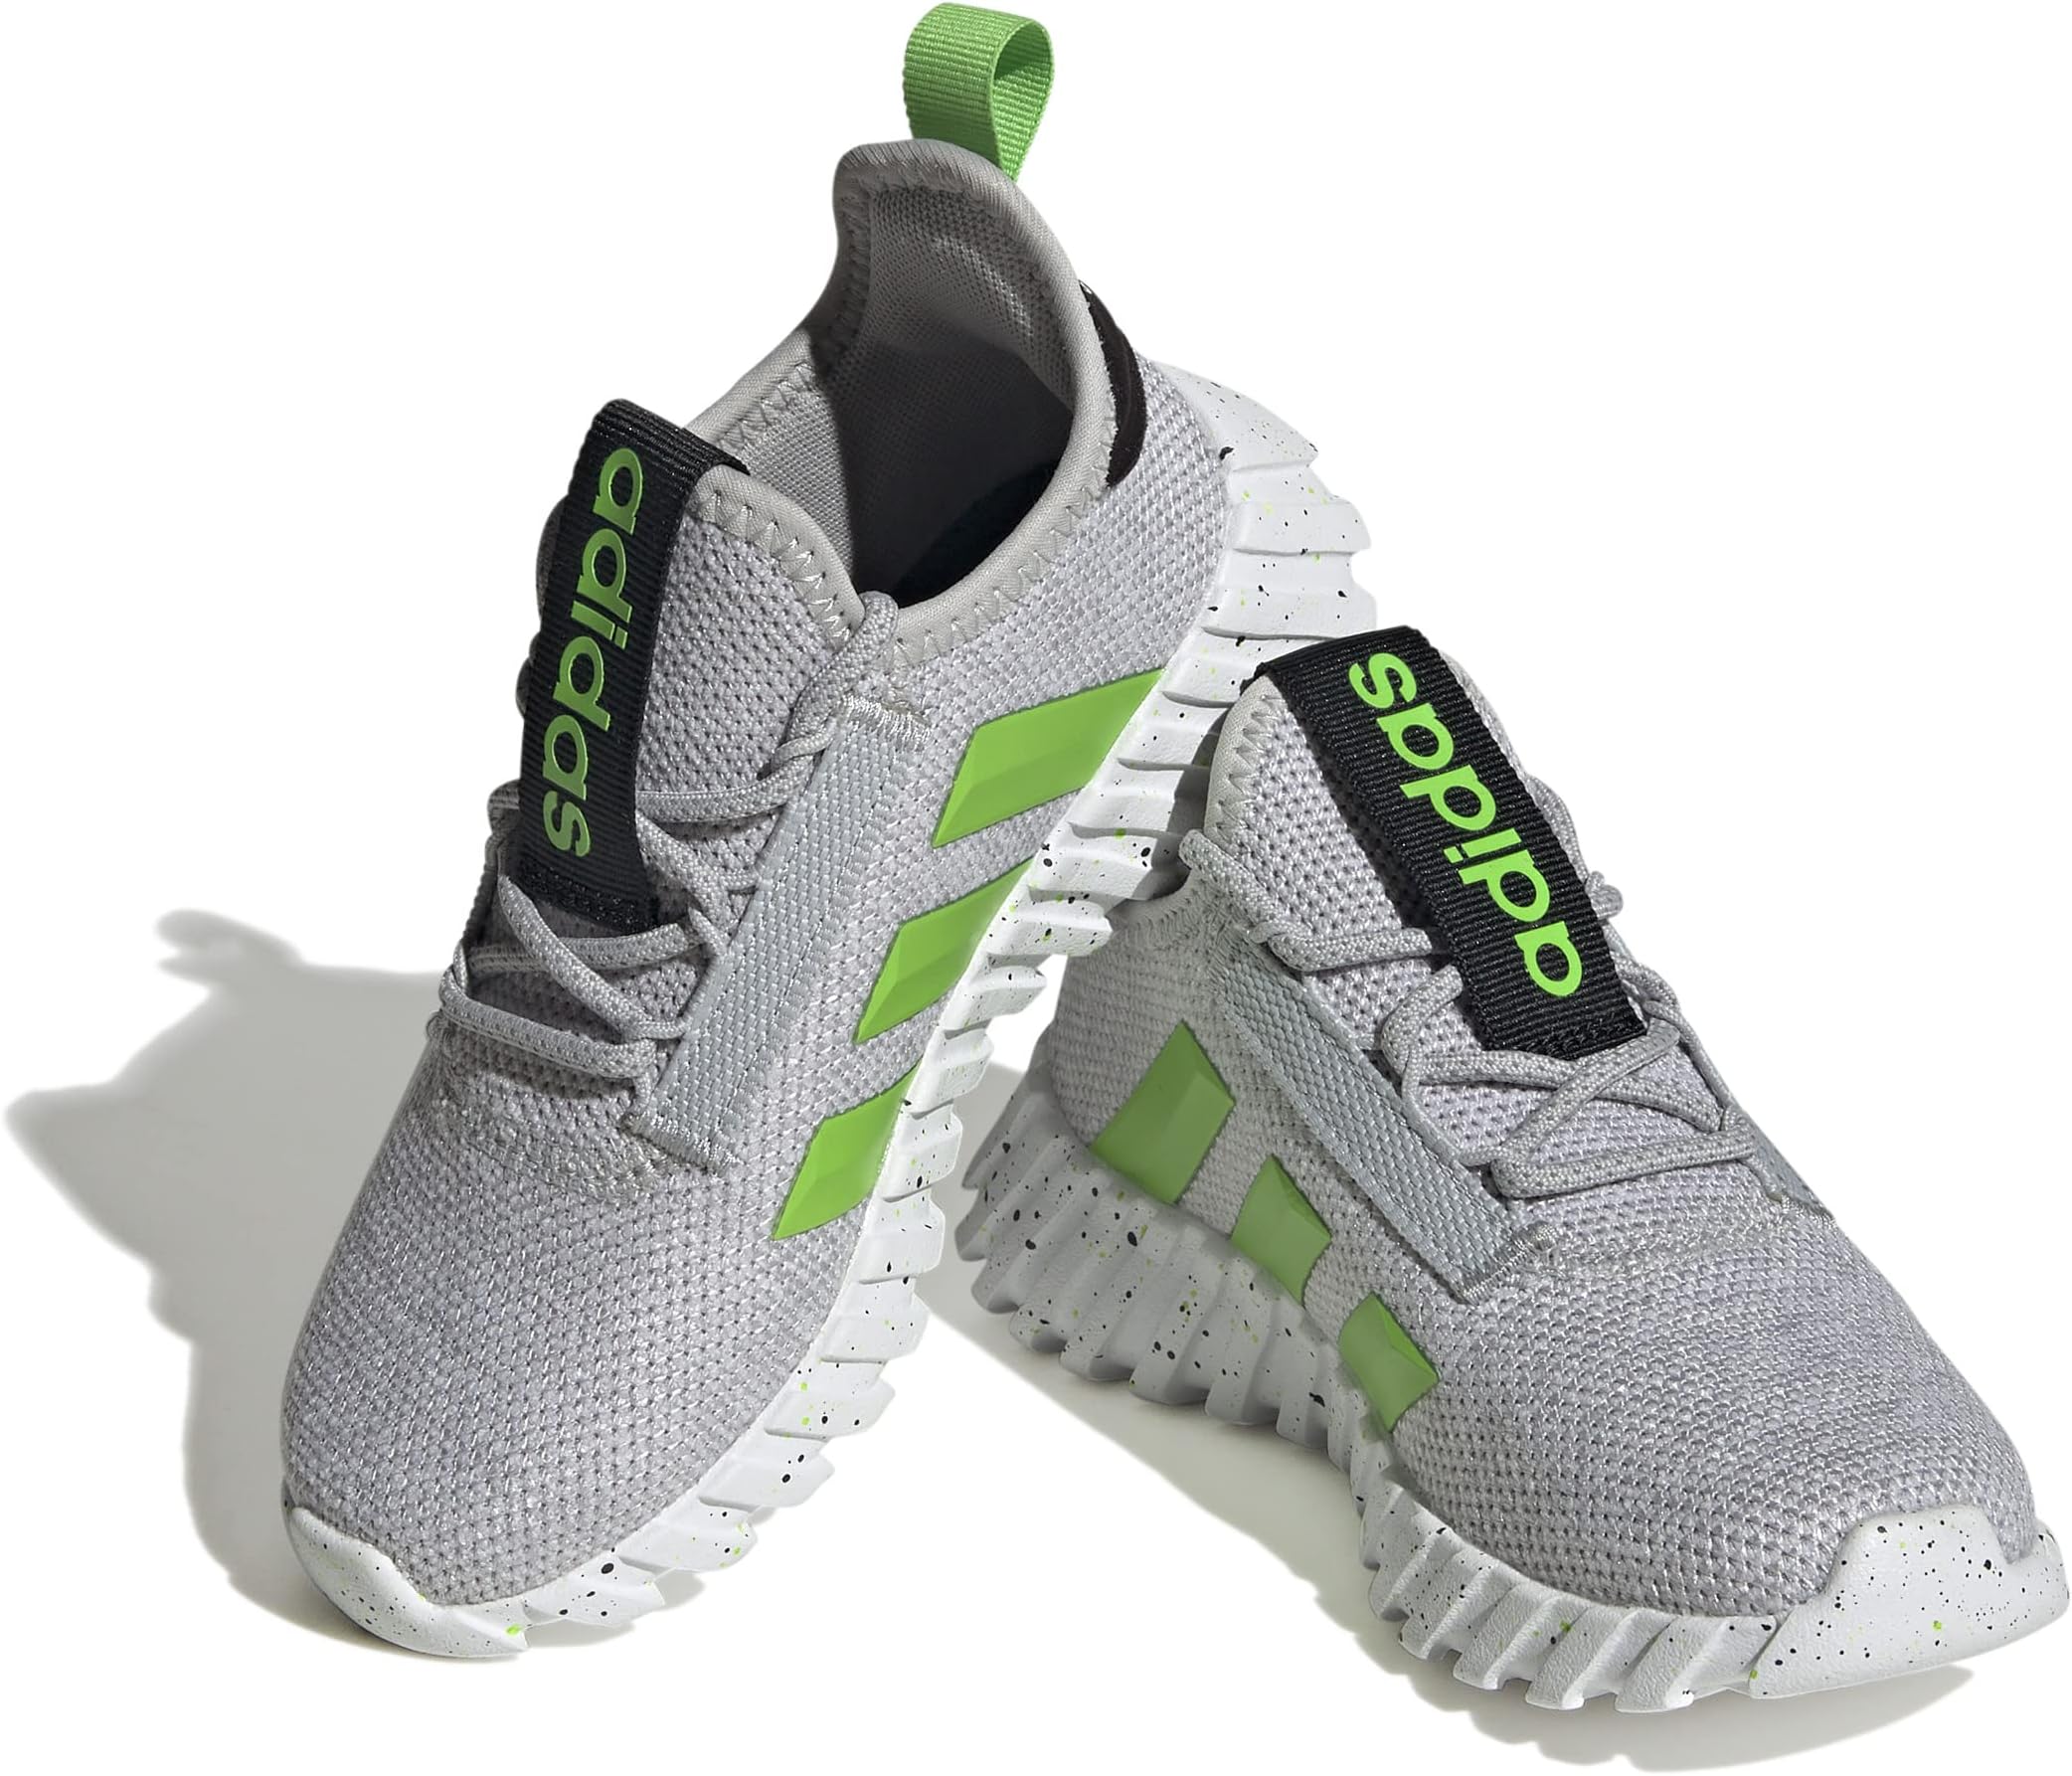 кроссовки adidas performance ultraboost dna unisex grey two grey two lucid blue Кроссовки Kaptir 3.0 Athletic Sneakers adidas, цвет Grey Two/Lucid Lime/Core Black